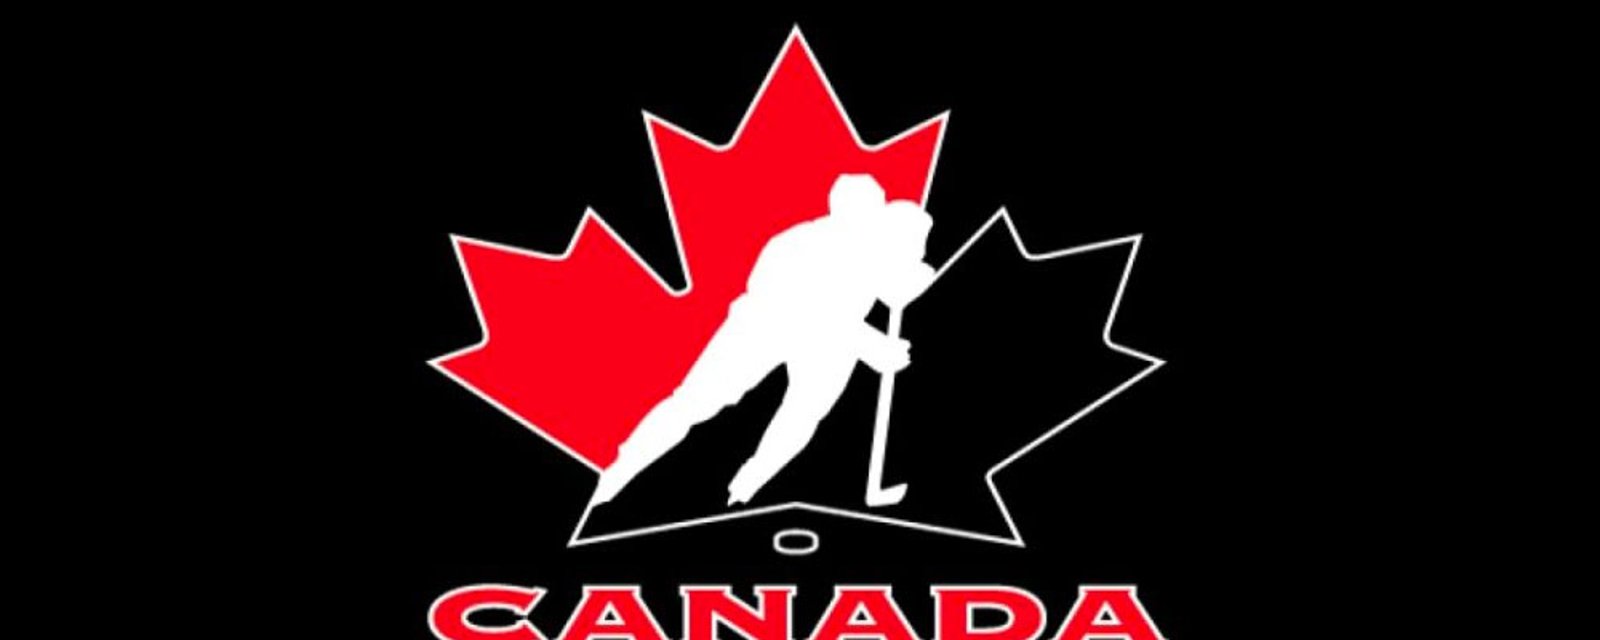 One of the biggest junior hockey leagues in the world leaves Hockey Canada!